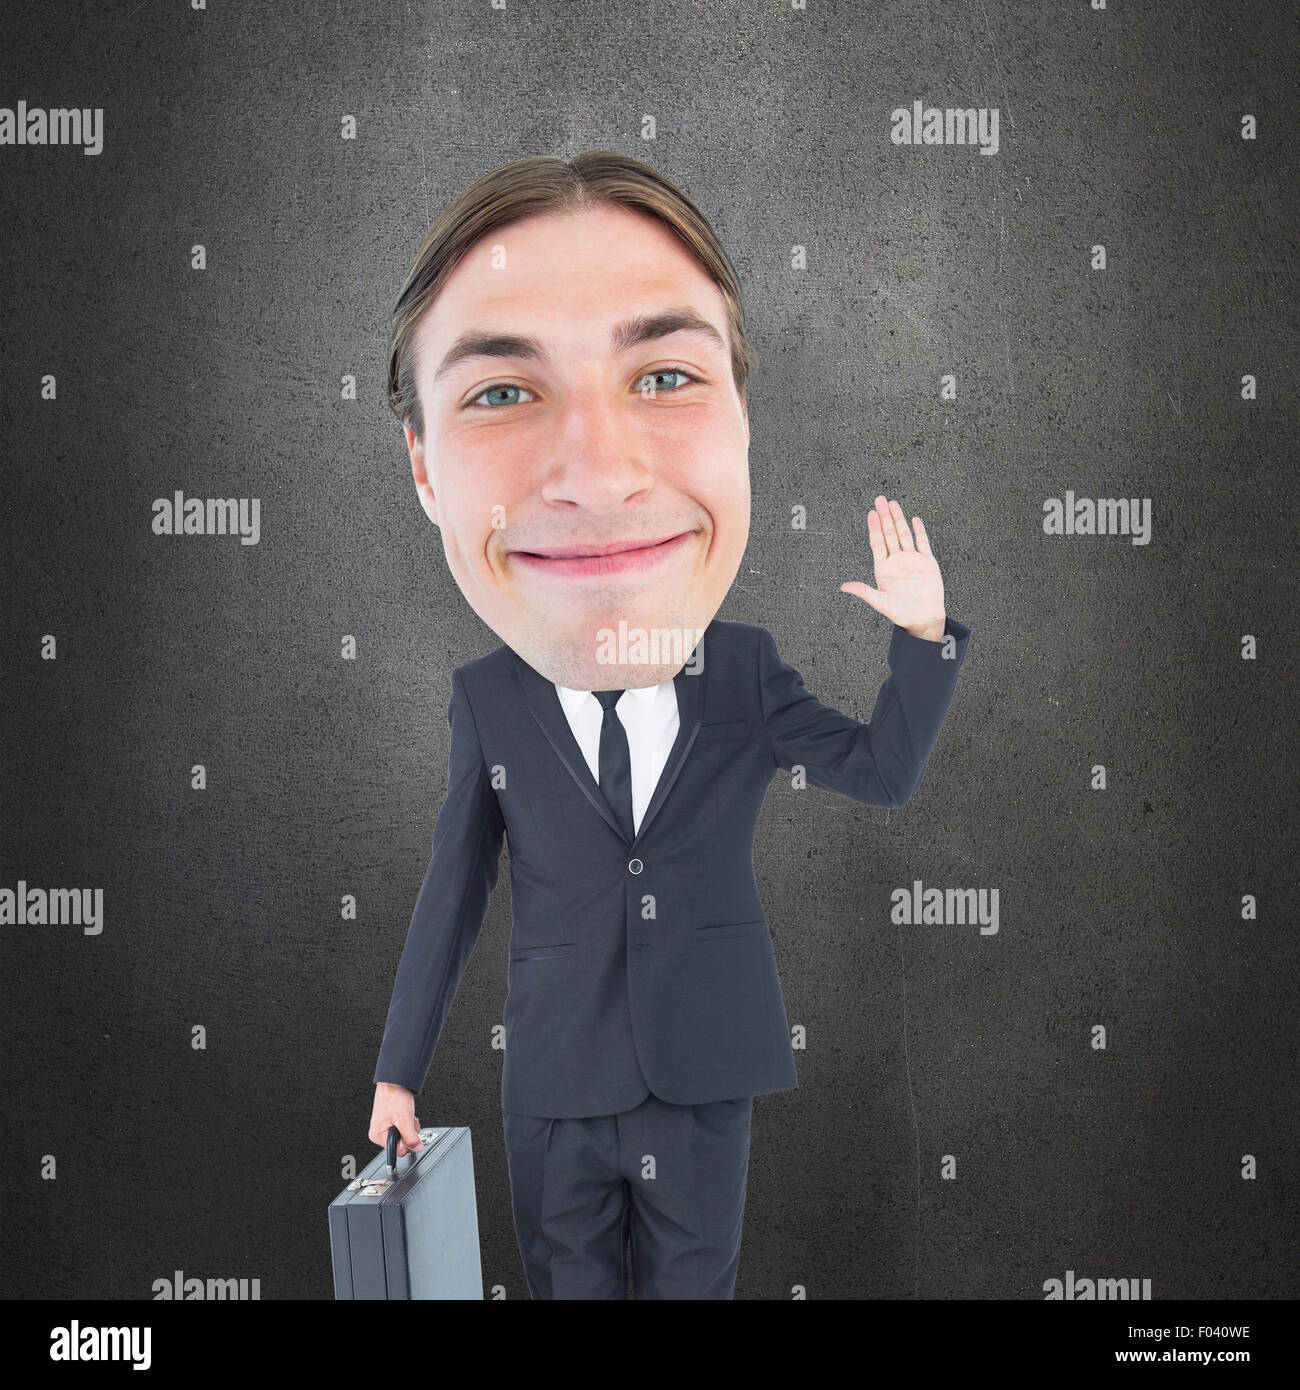 Composite image of geeky businessman waving Stock Photo